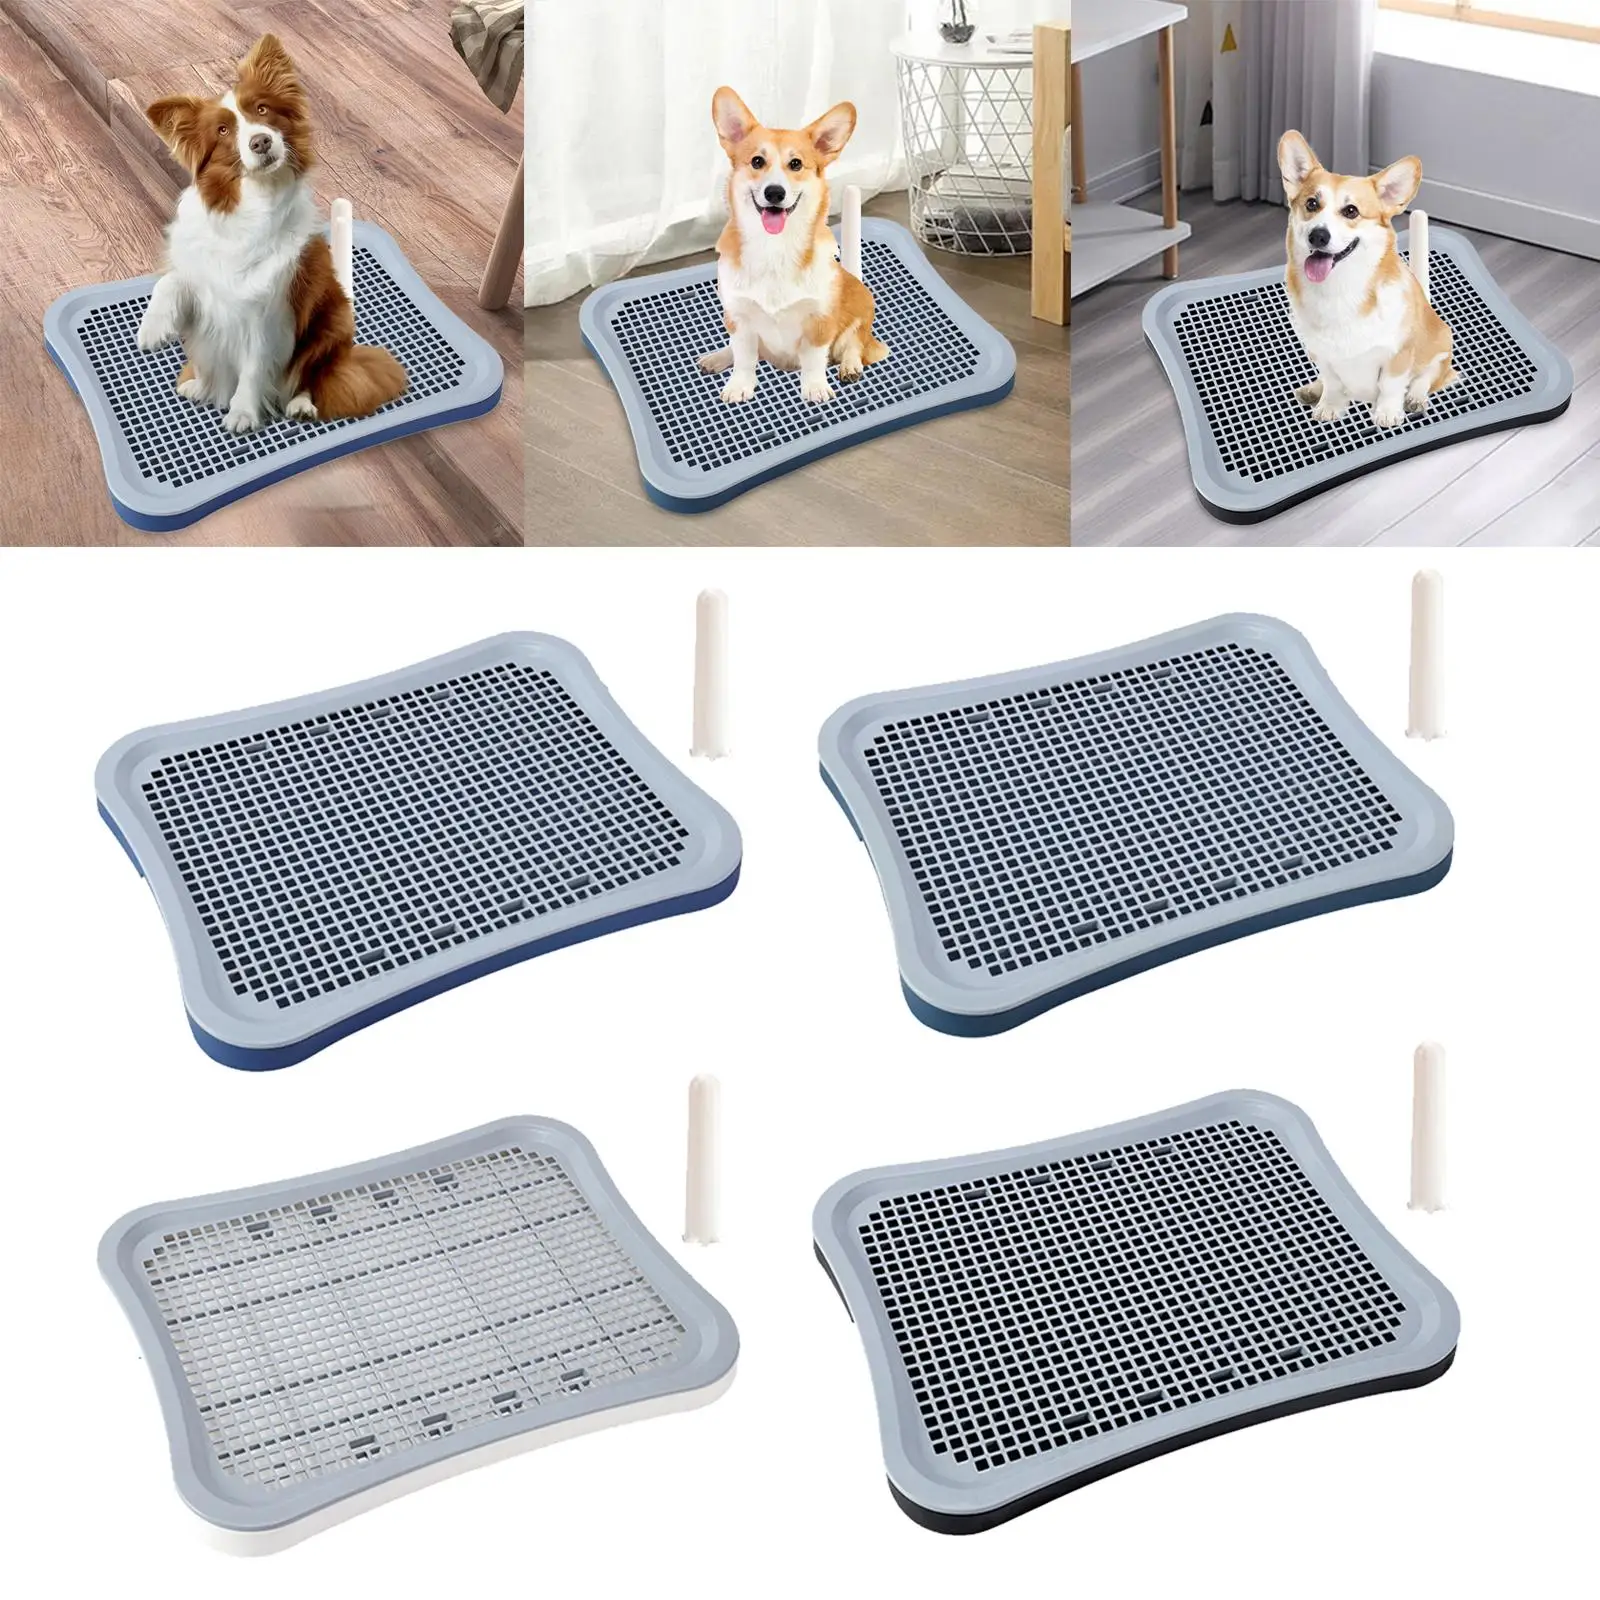 Dog Toilet Puppy Pee Pad Durable Keep Clean Removable Bedpan Non Slip Dog Potty